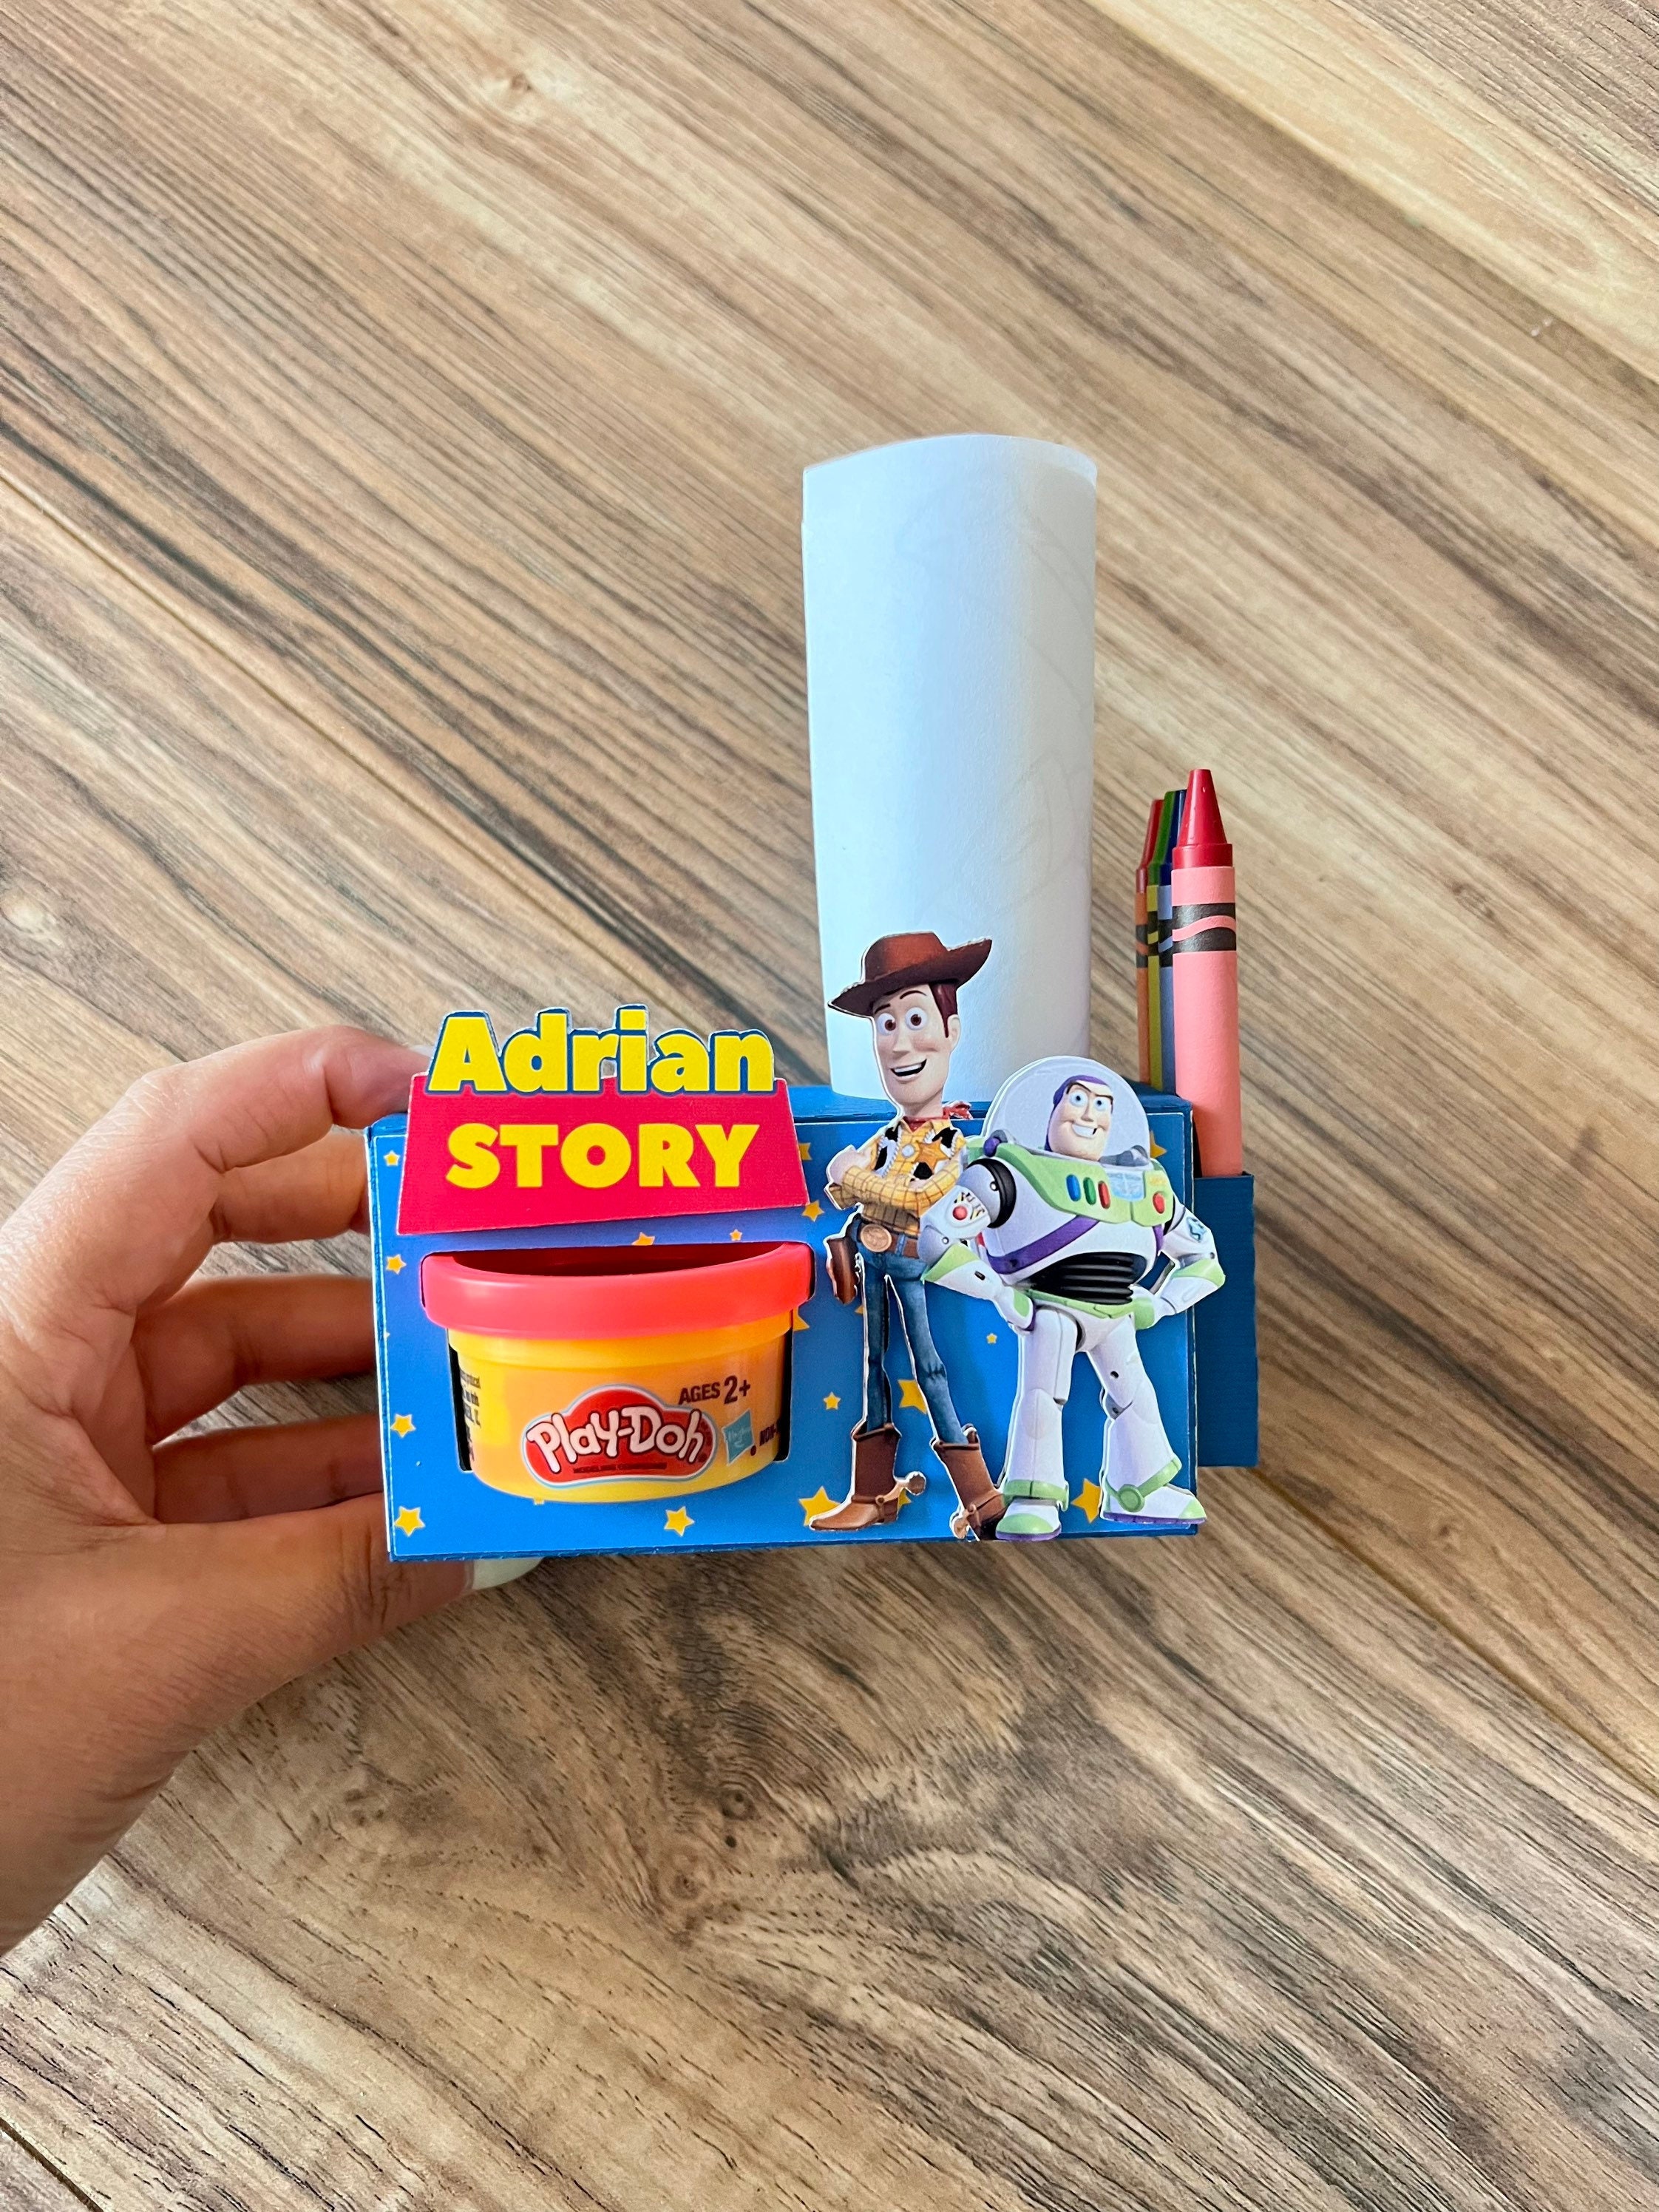 Play Doh Toy Story, Ham, how to make Ham out of Play Doh, with a